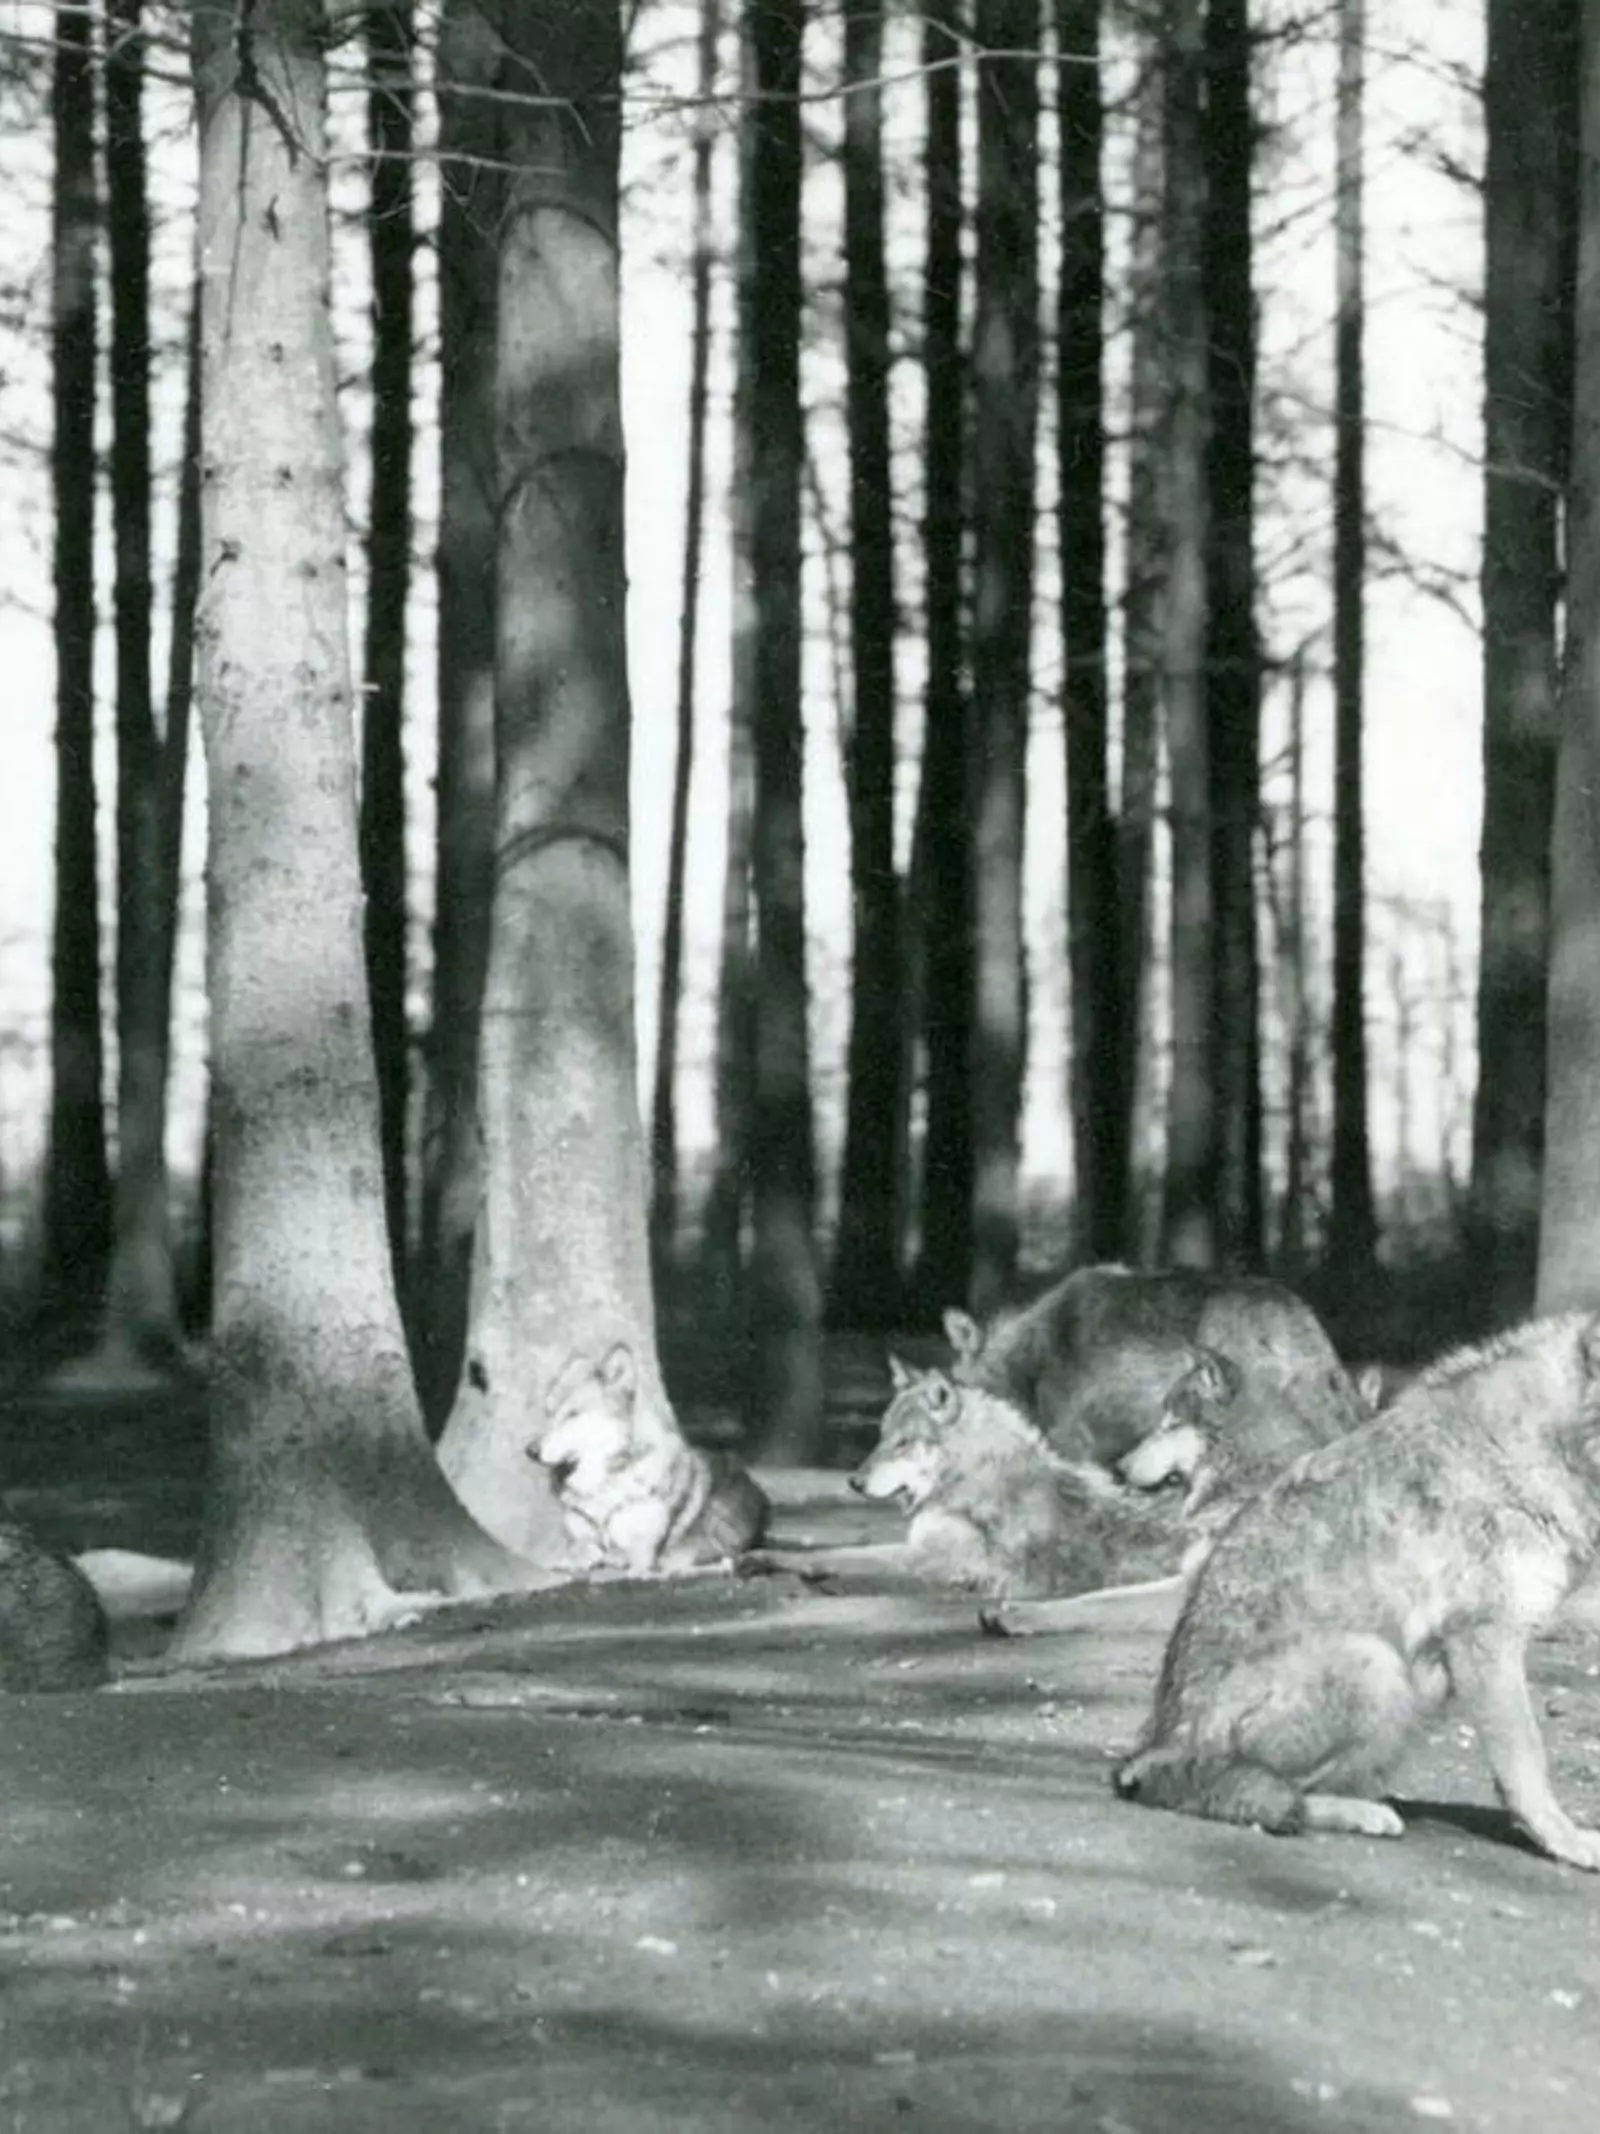 A pack of hybrid wolves, Common x Timber, resting on the bare earth beneath the trees of a coniferous copse at Whipsnade in April 1934.